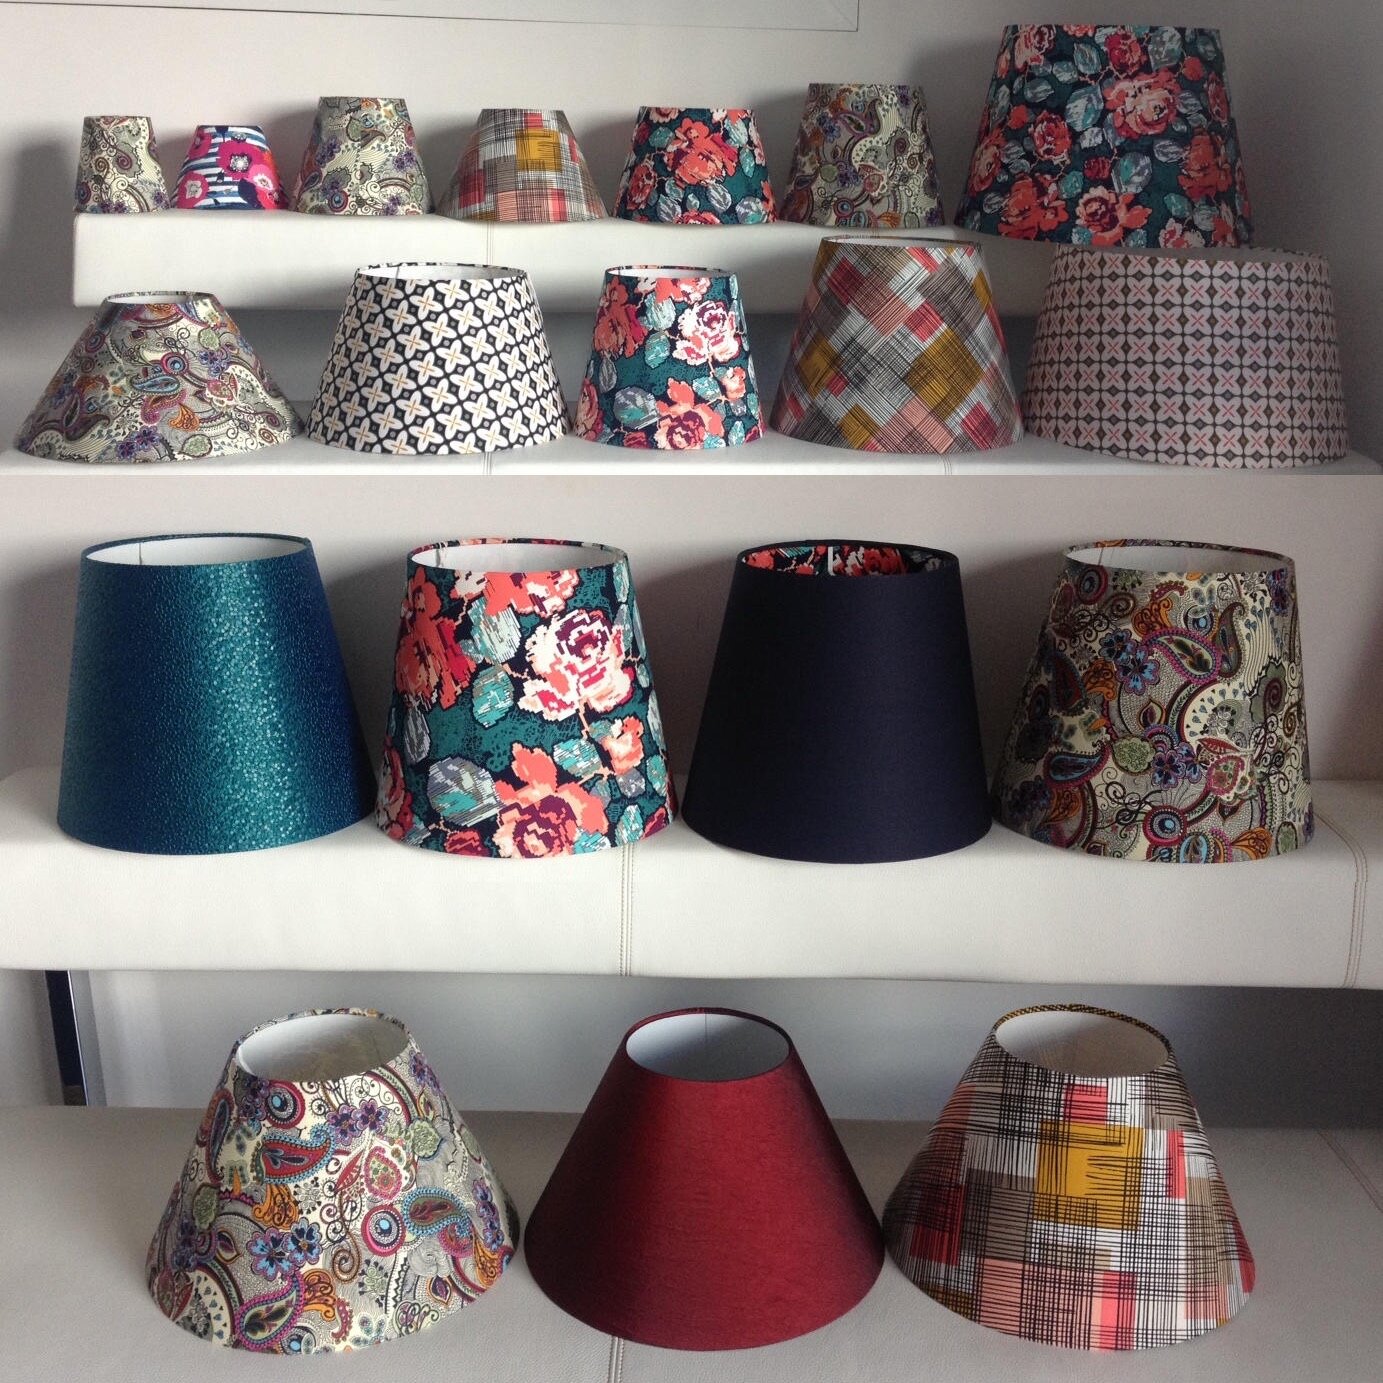 We make Lampshades in all shapes and sizes